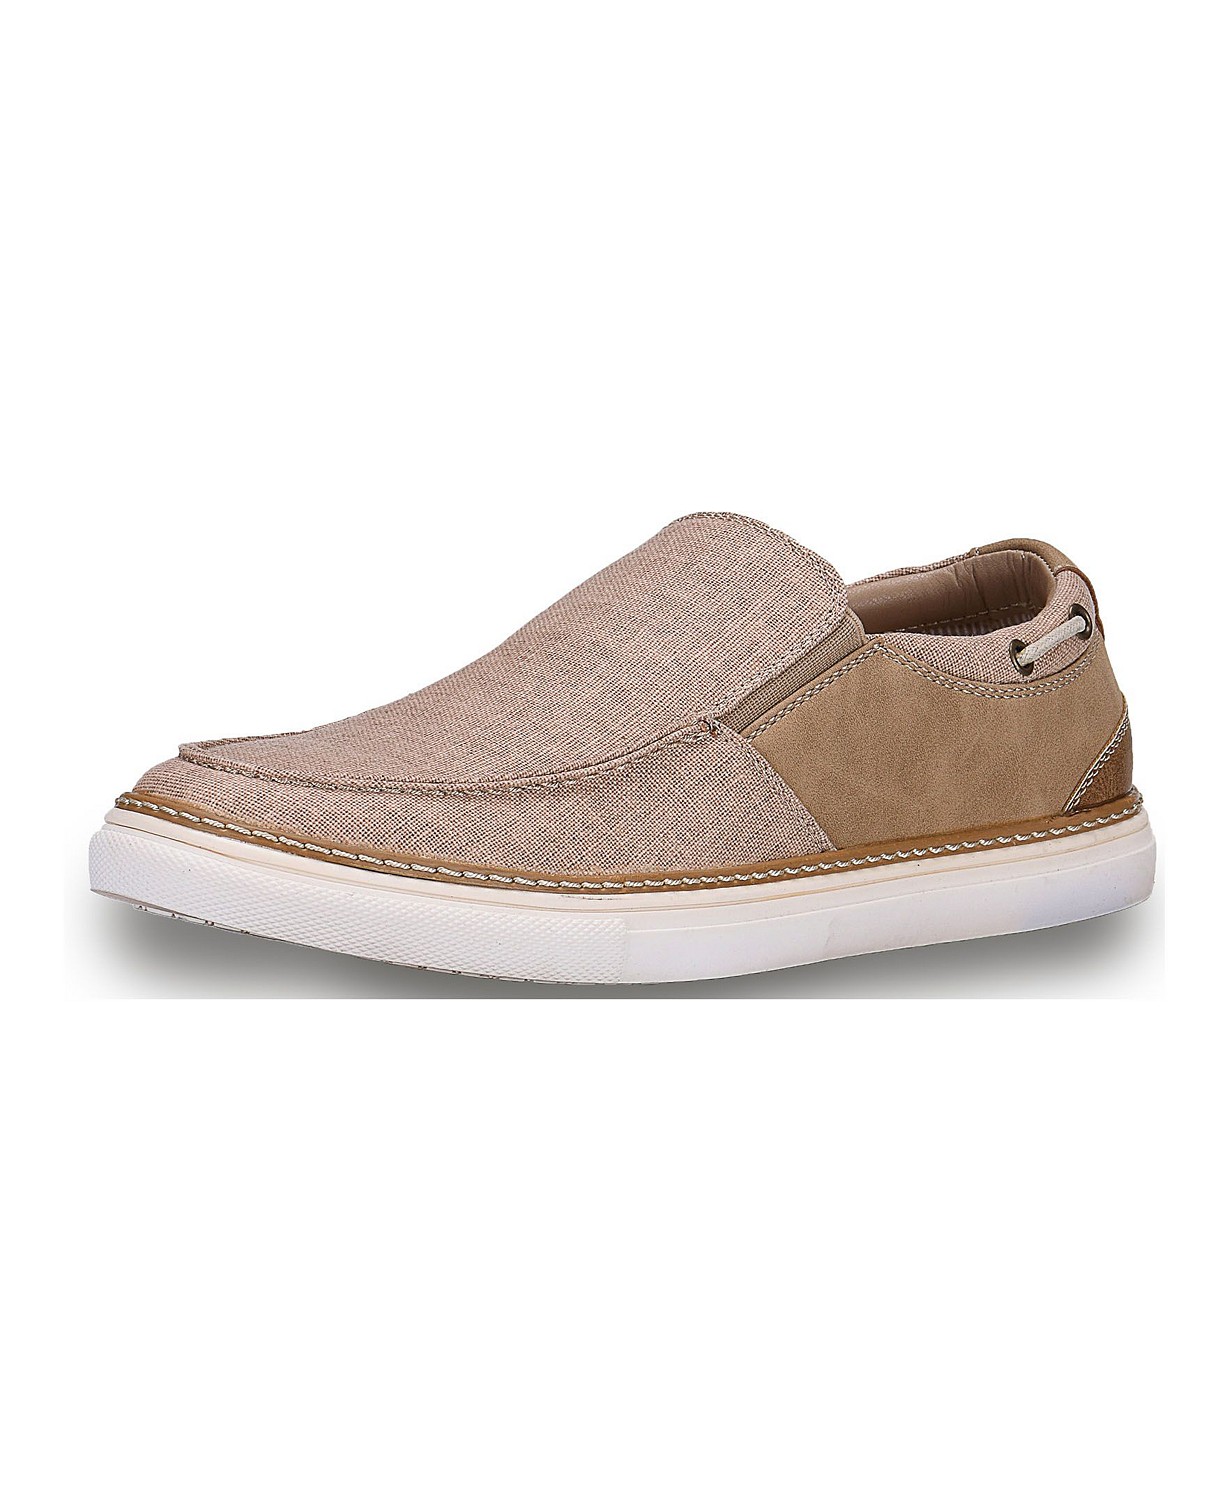 woocommerce-673321-2209615.cloudwaysapps.com-gallery-seven-mens-brown-canvas-slip-on-boat-shoes